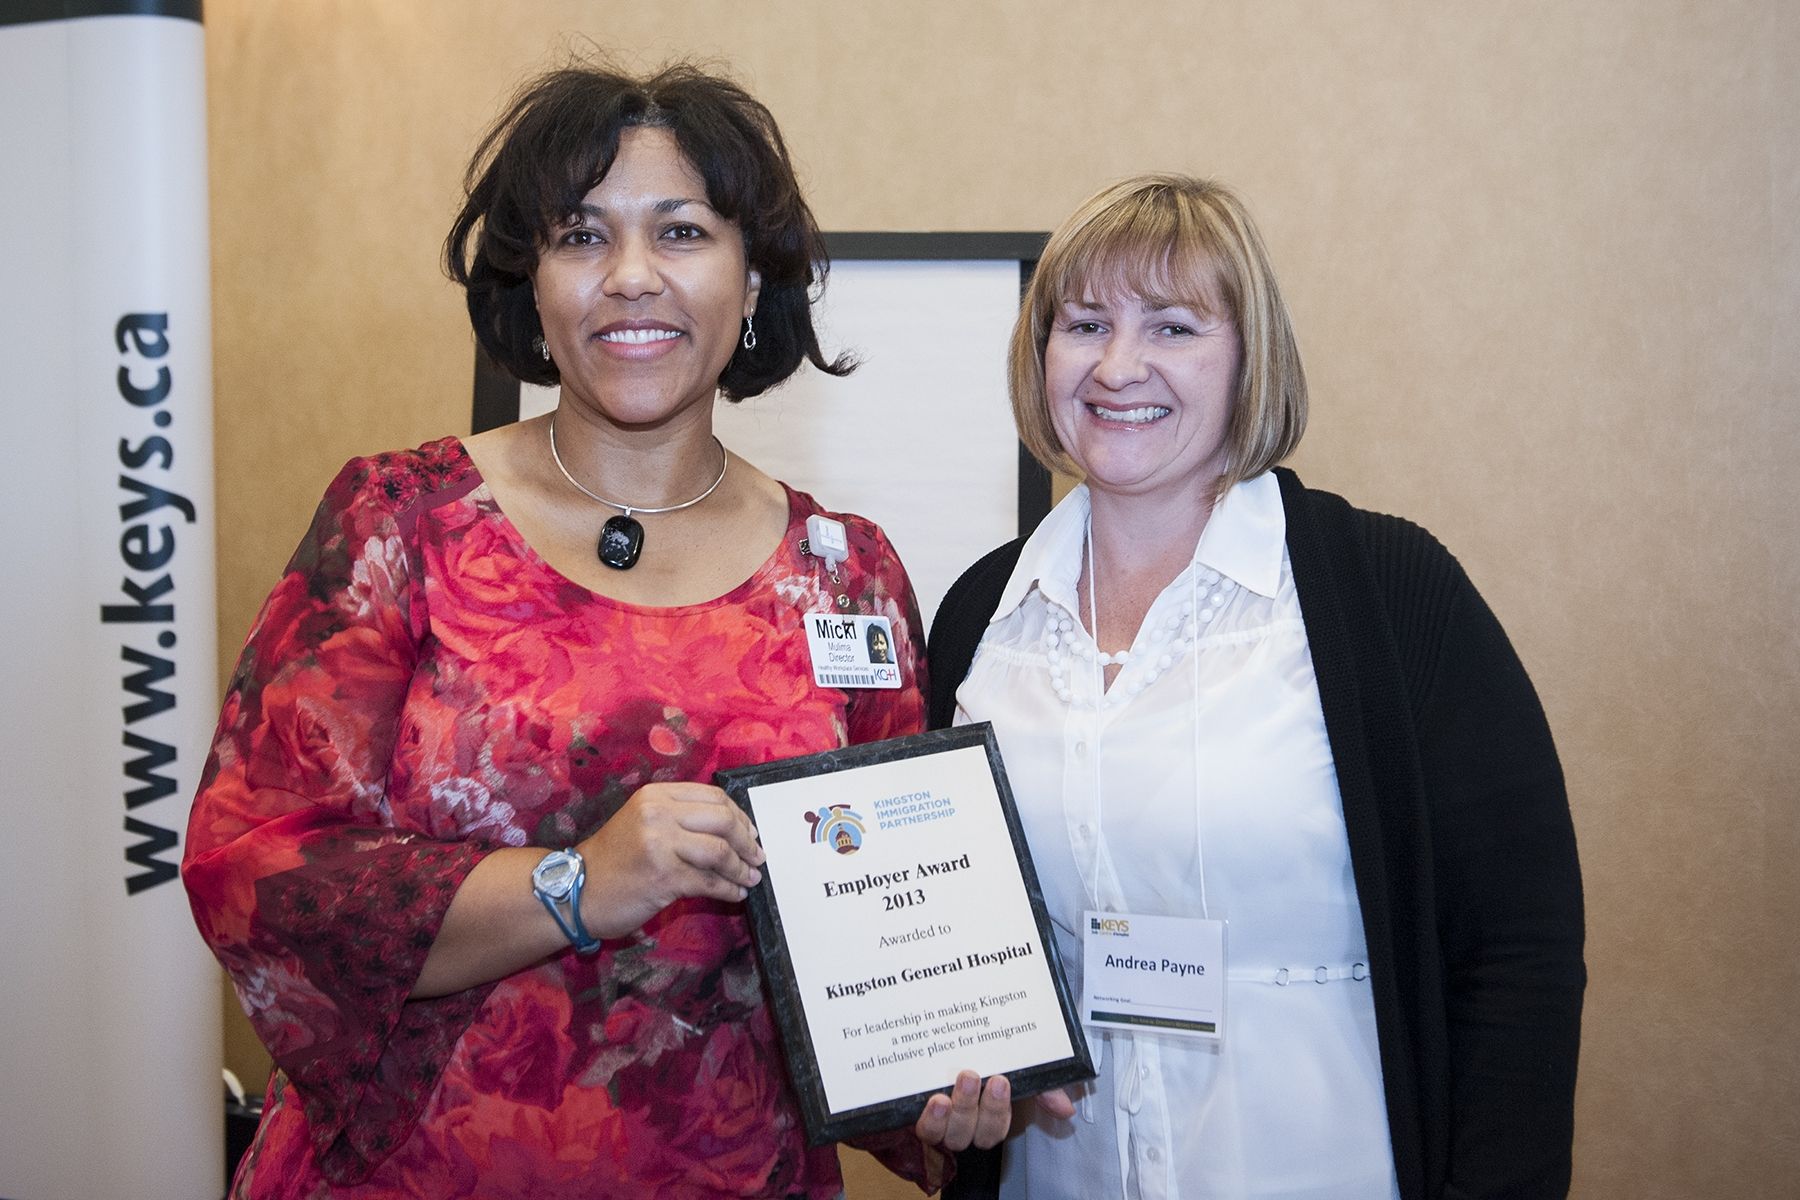 Micki Muima, Director of Healthy Workplace Services (left) accepts the Employer Award 2013 from Andrea Payne of the Kingston Immigration Partnership at the Residence Inn Mariott.